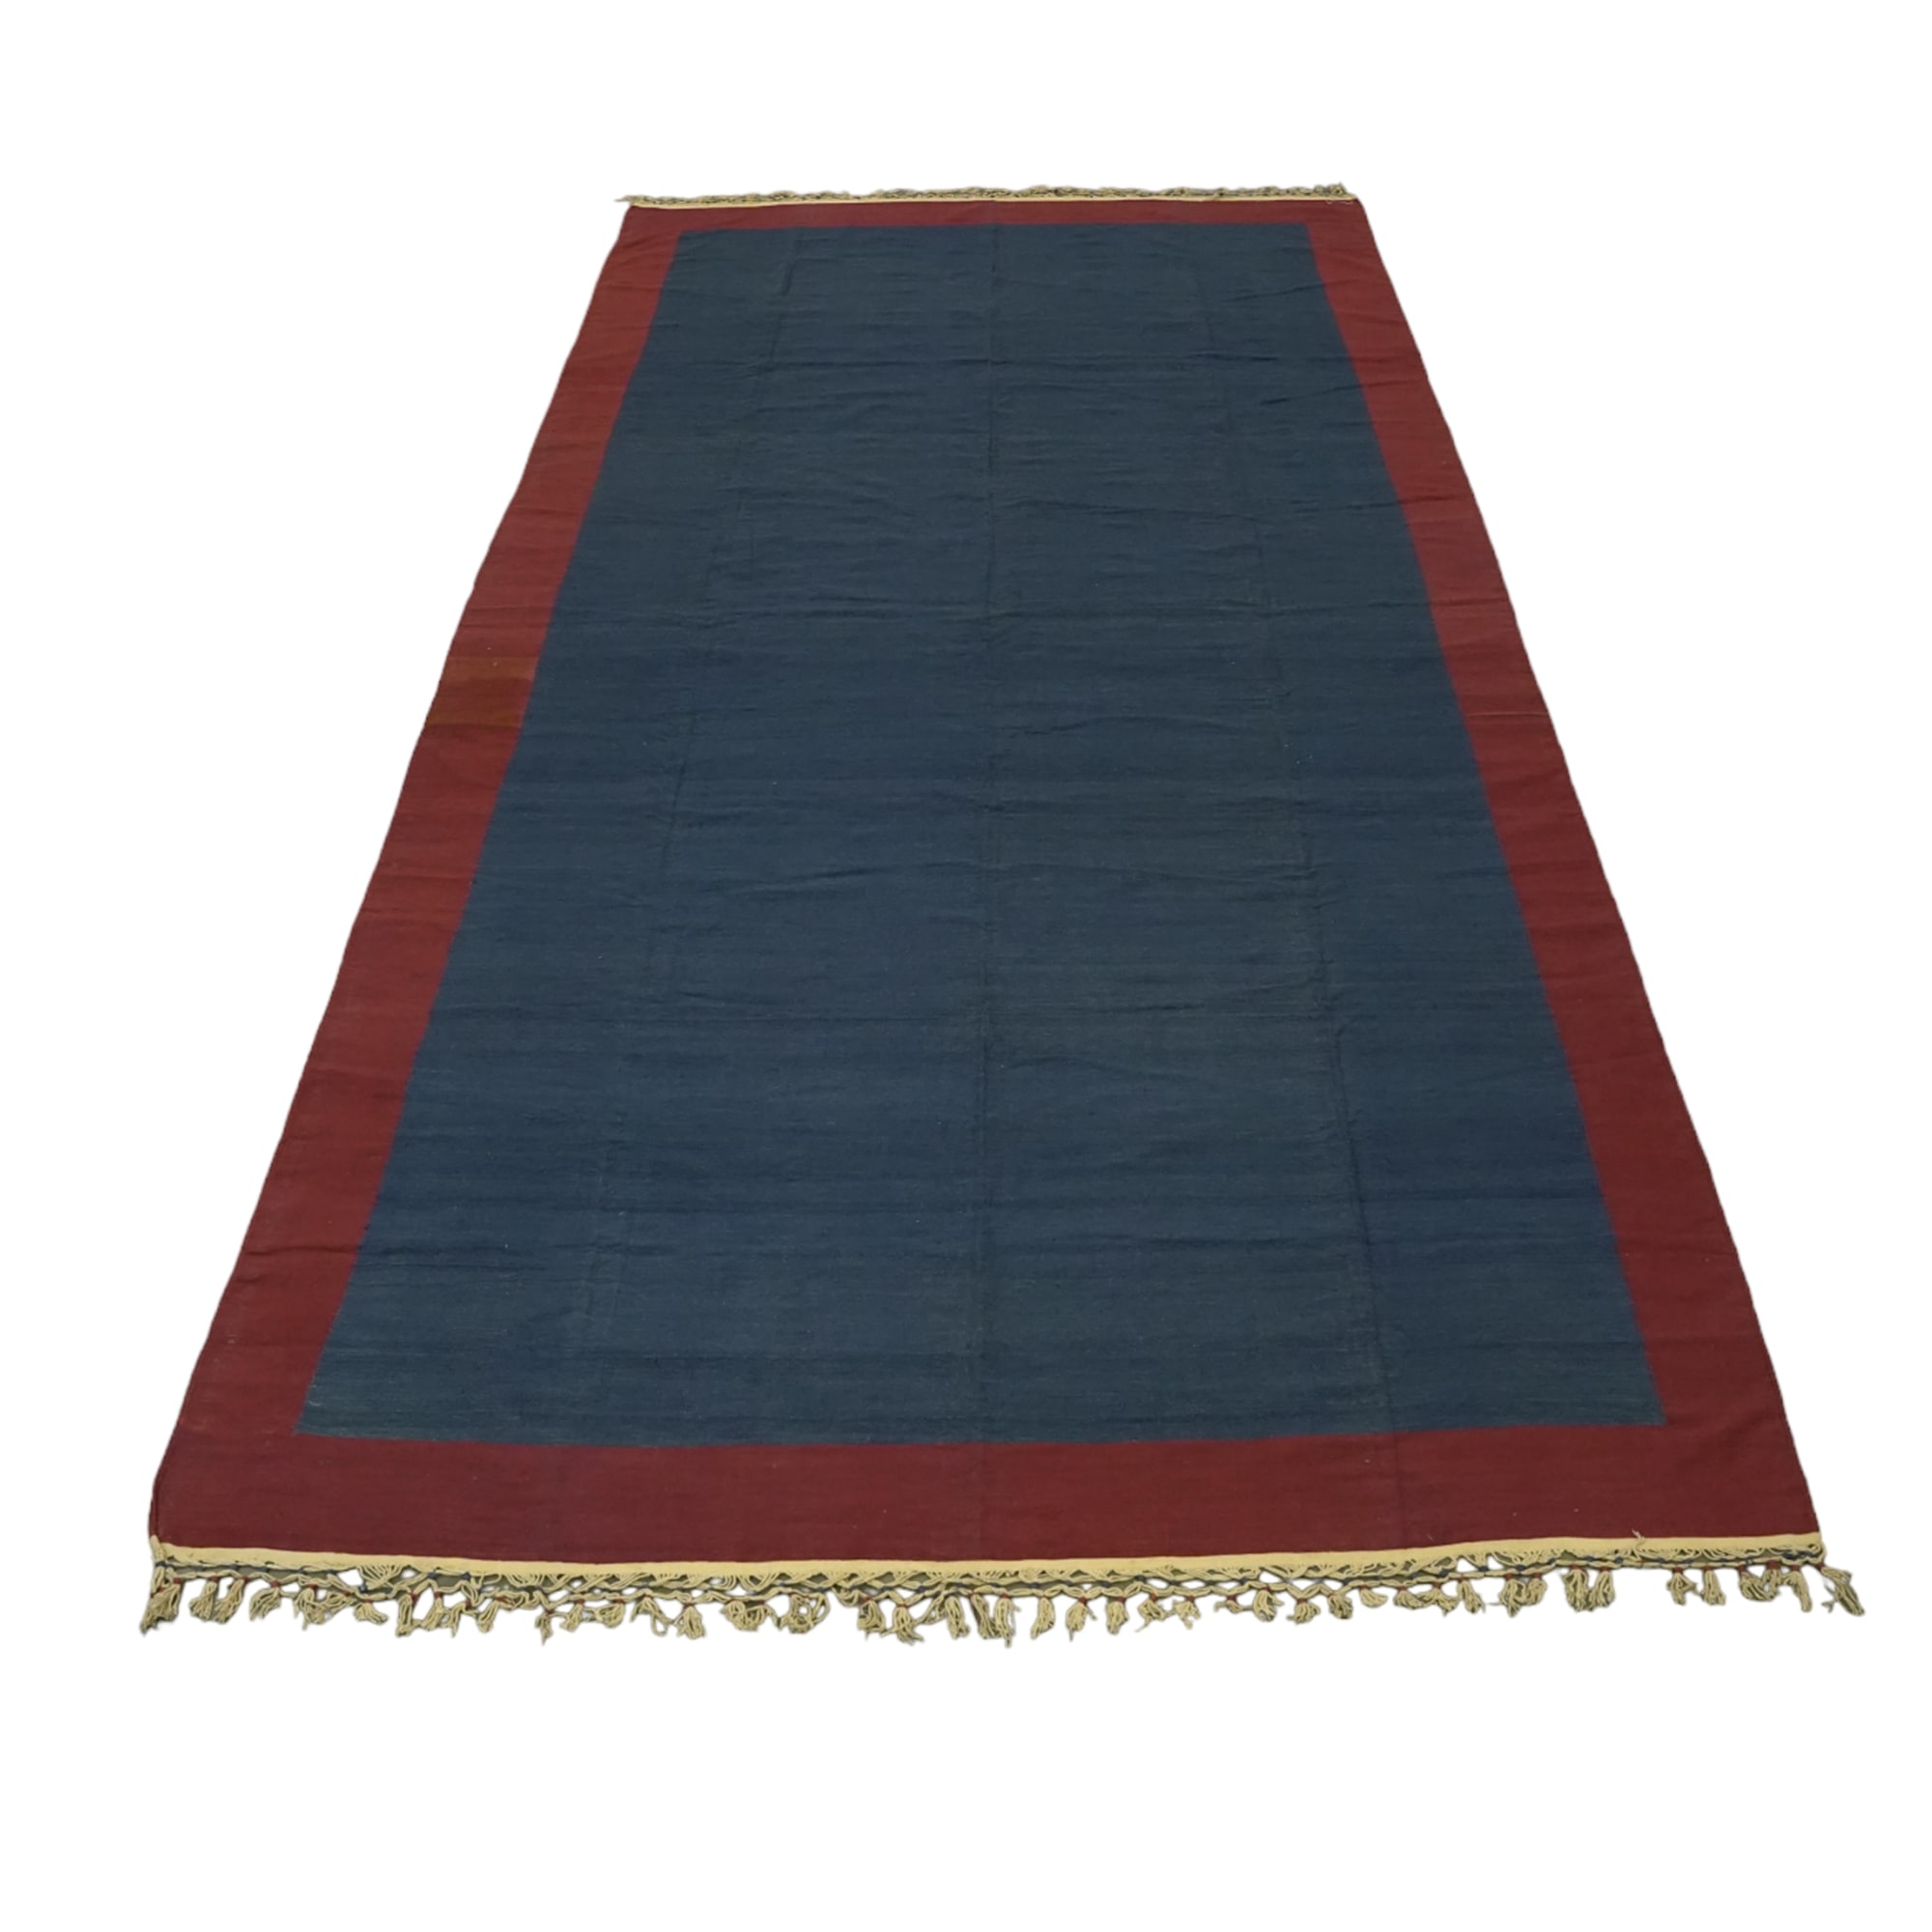 Vintage Dhurrie Rug in Blue with Red Geometric Border, from Rug & Kilim